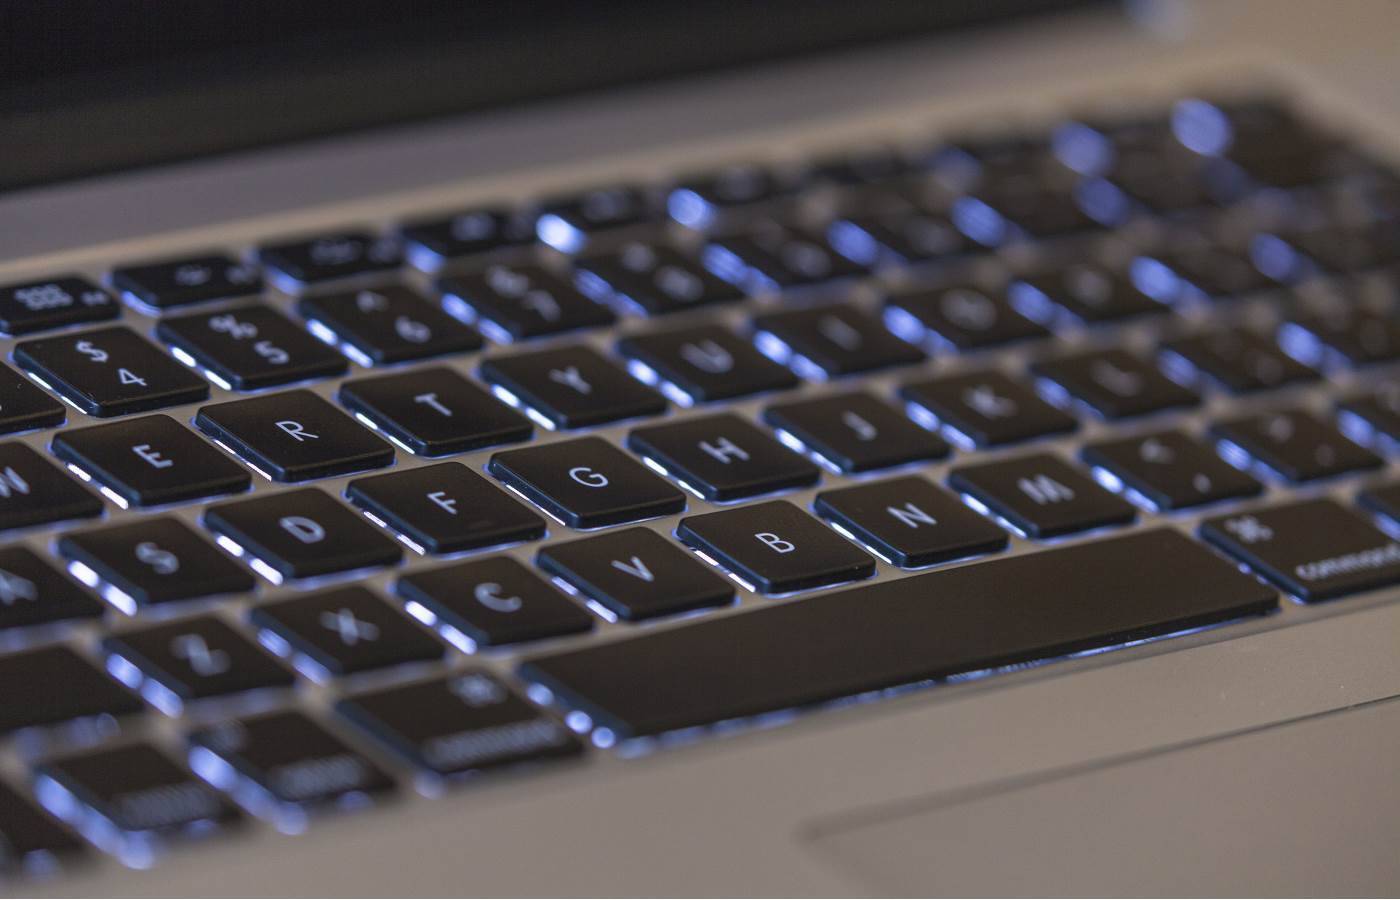 what r the upsides of the apple computer keyboard